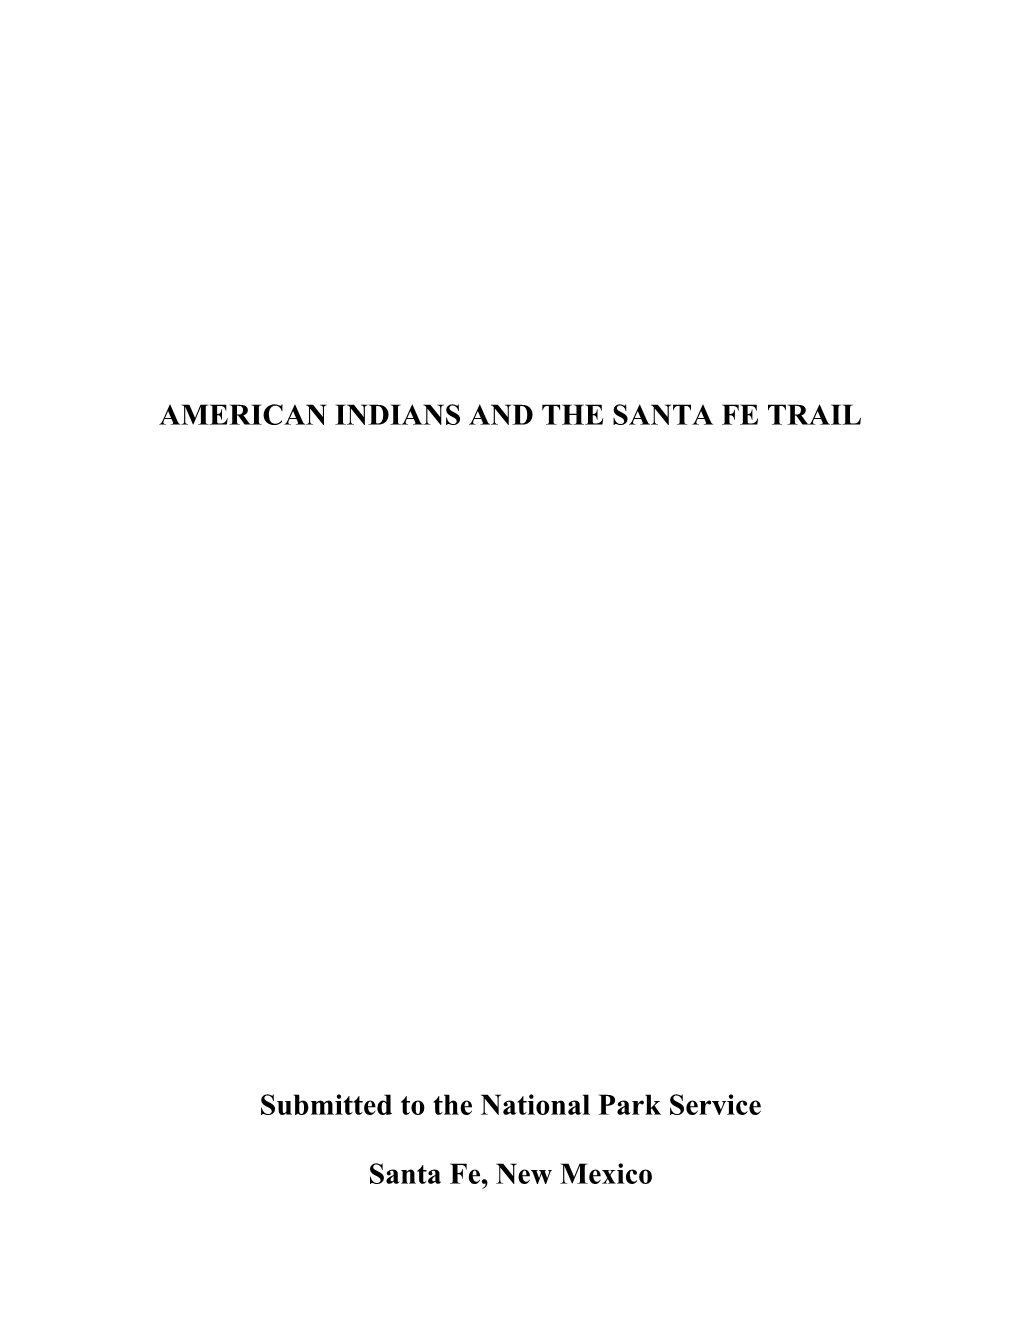 American Indians and the Santa Fe Trail